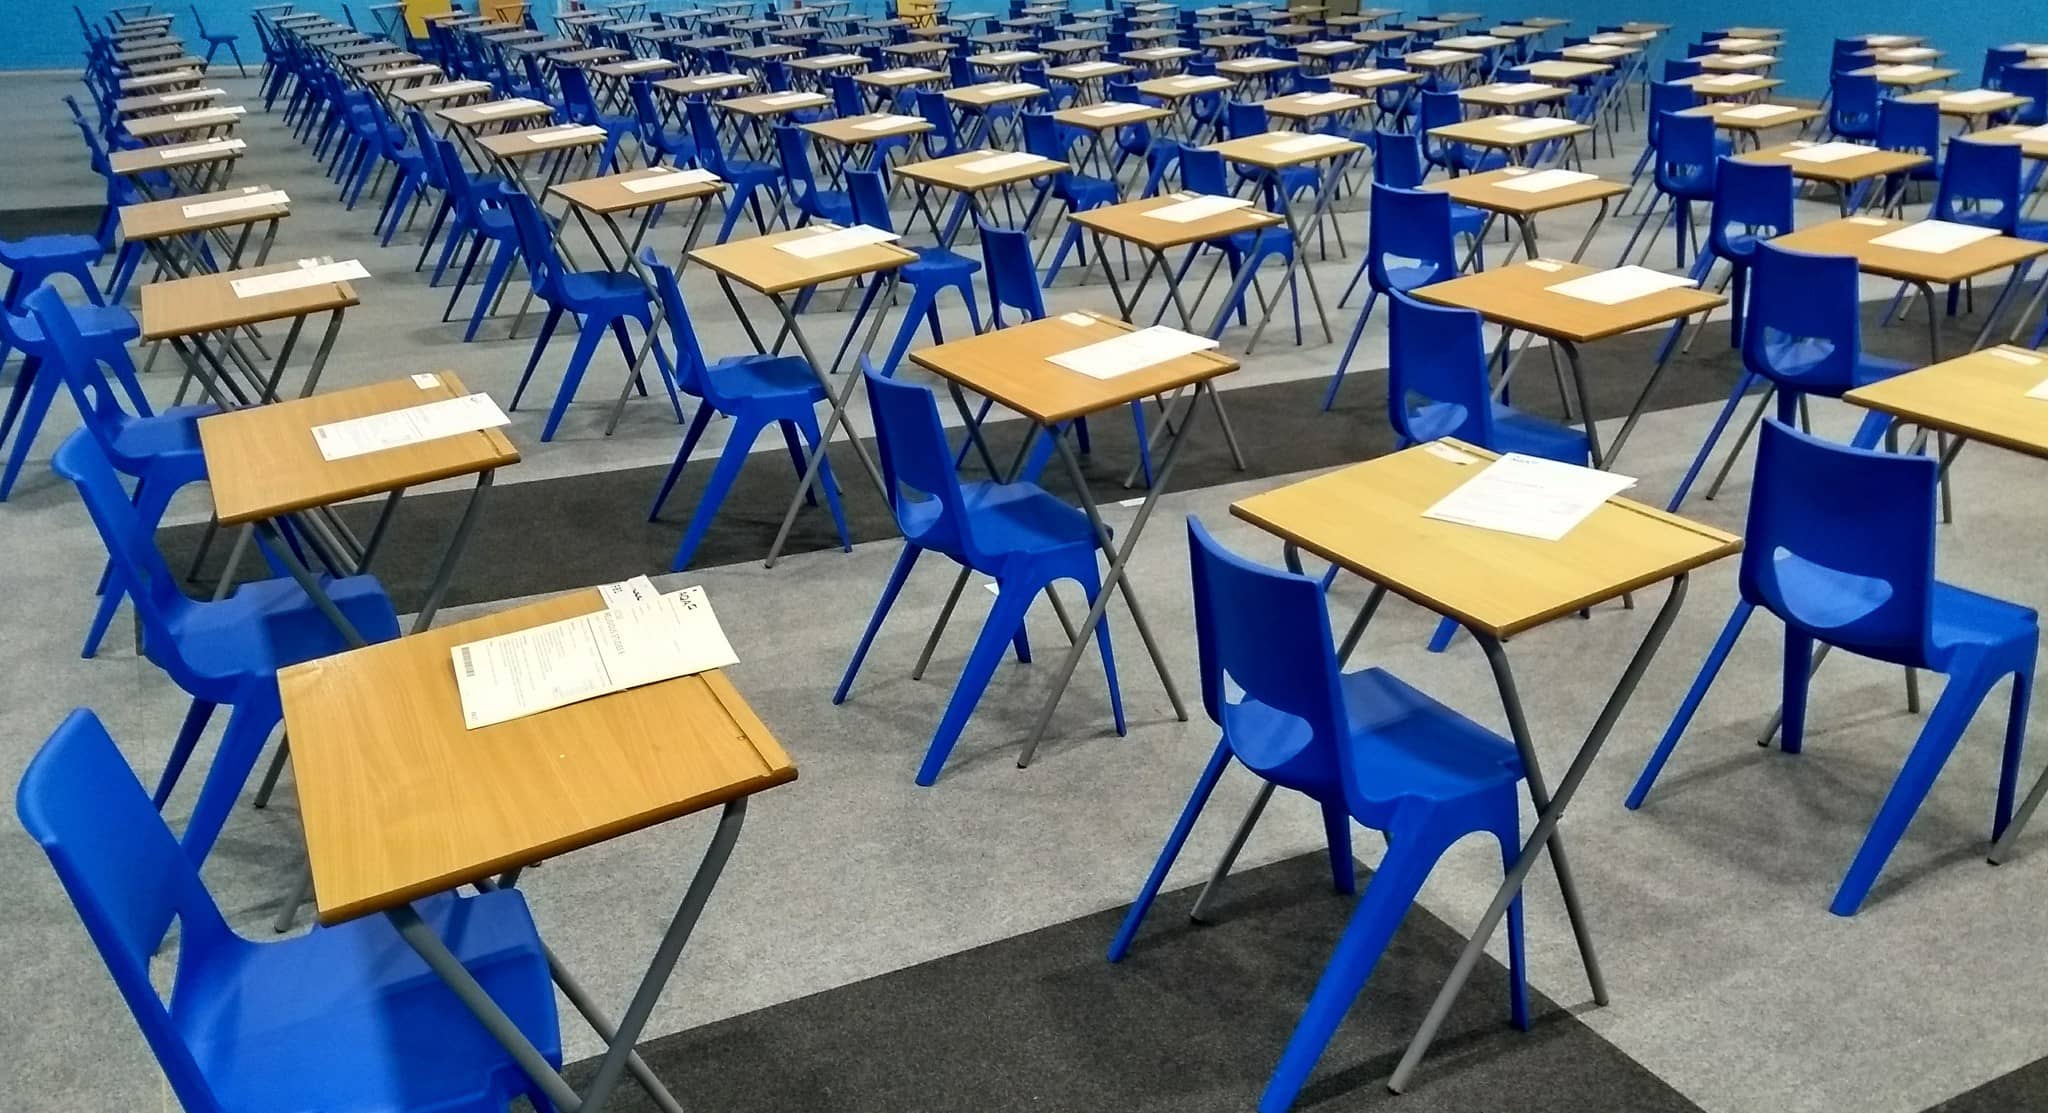 desks and chairs set up in a hall ready for exams